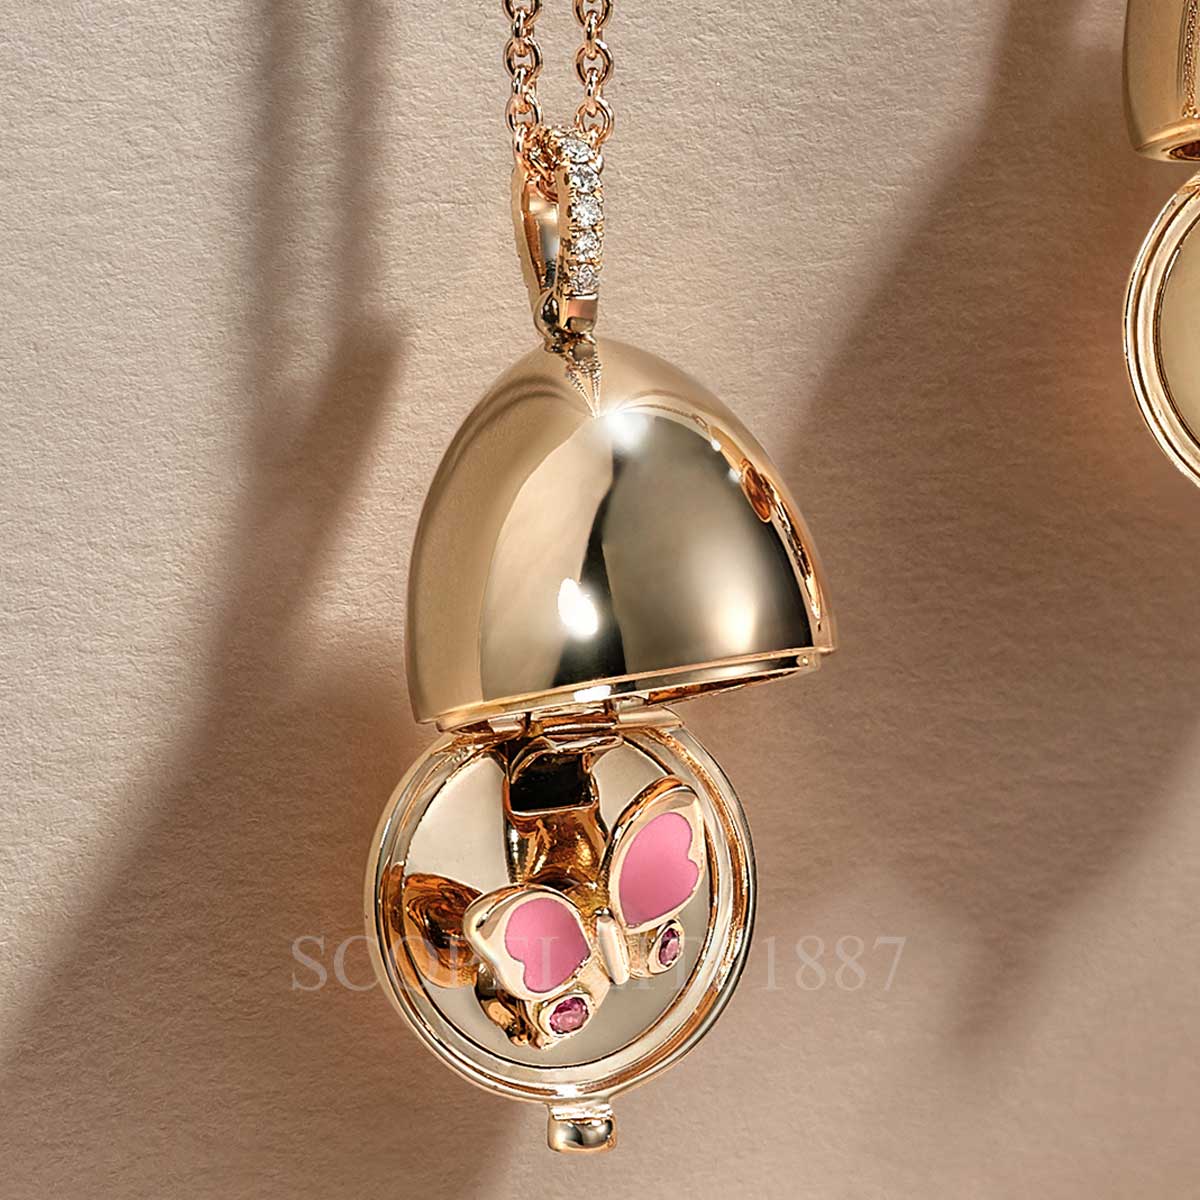 faberge egg pendant with butterfly secret locket